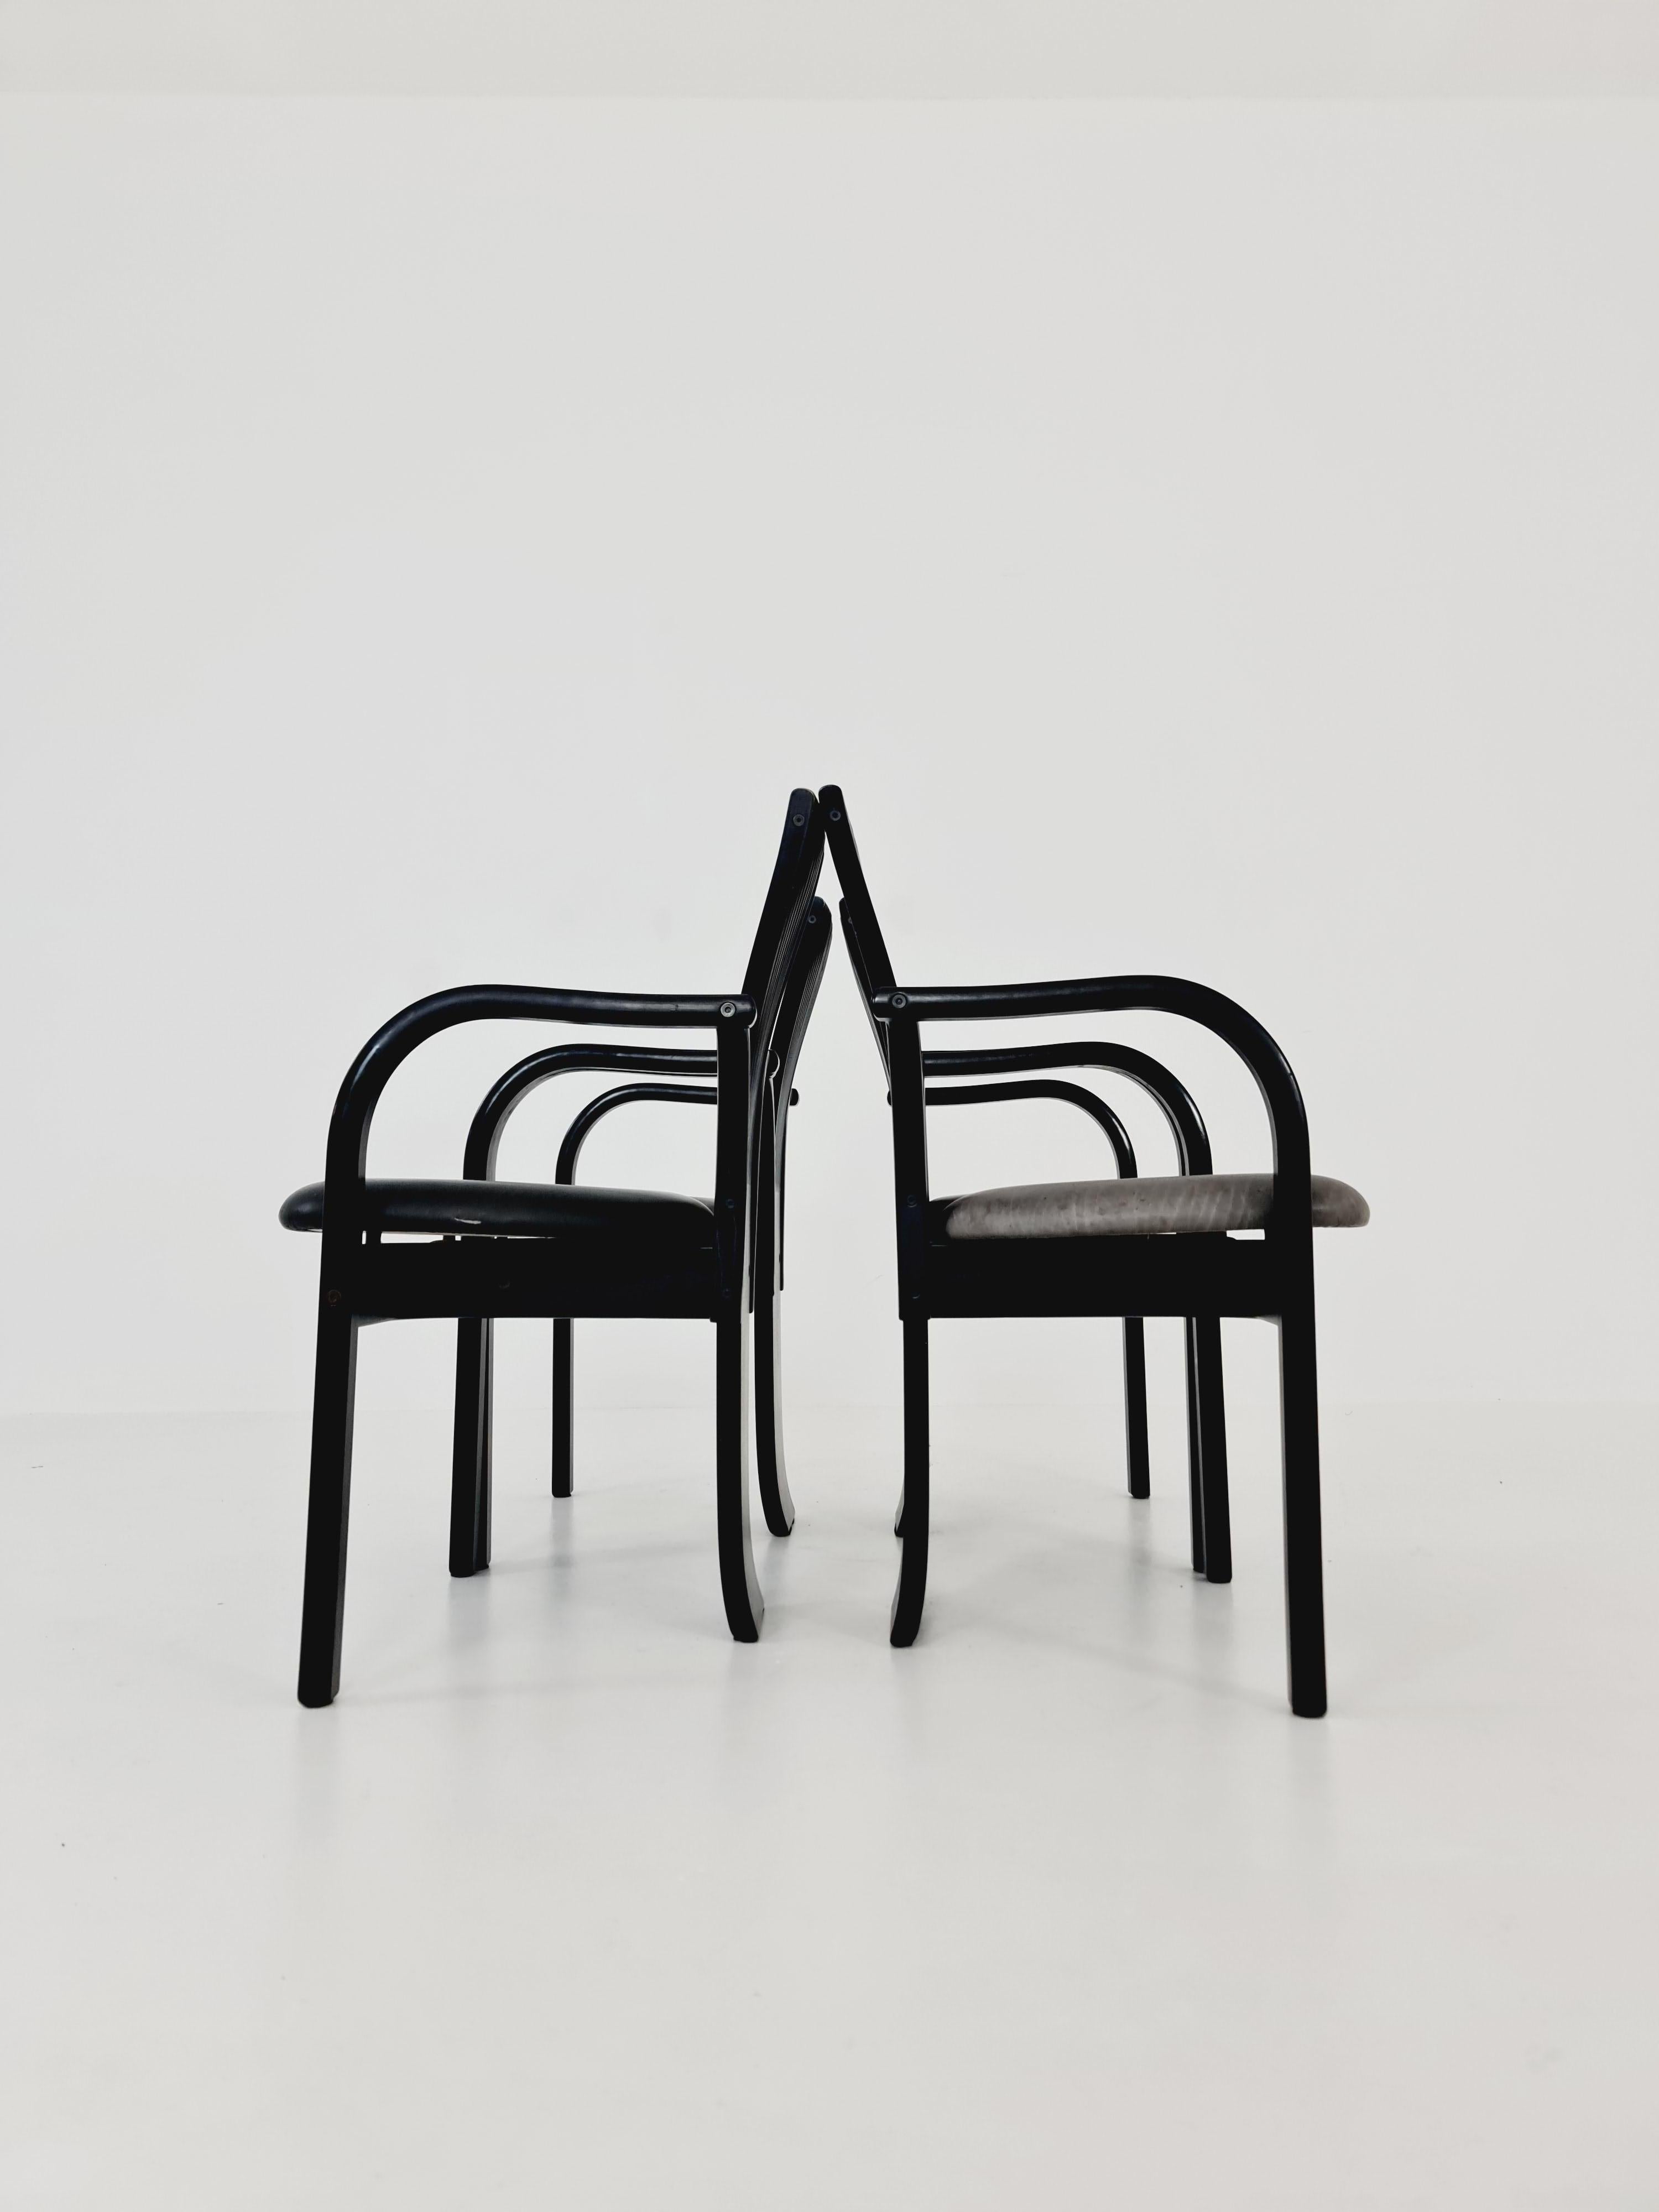 4 Totem dining chairs by Torstein Nilsen for Westnofa, Italian design table For Sale 10